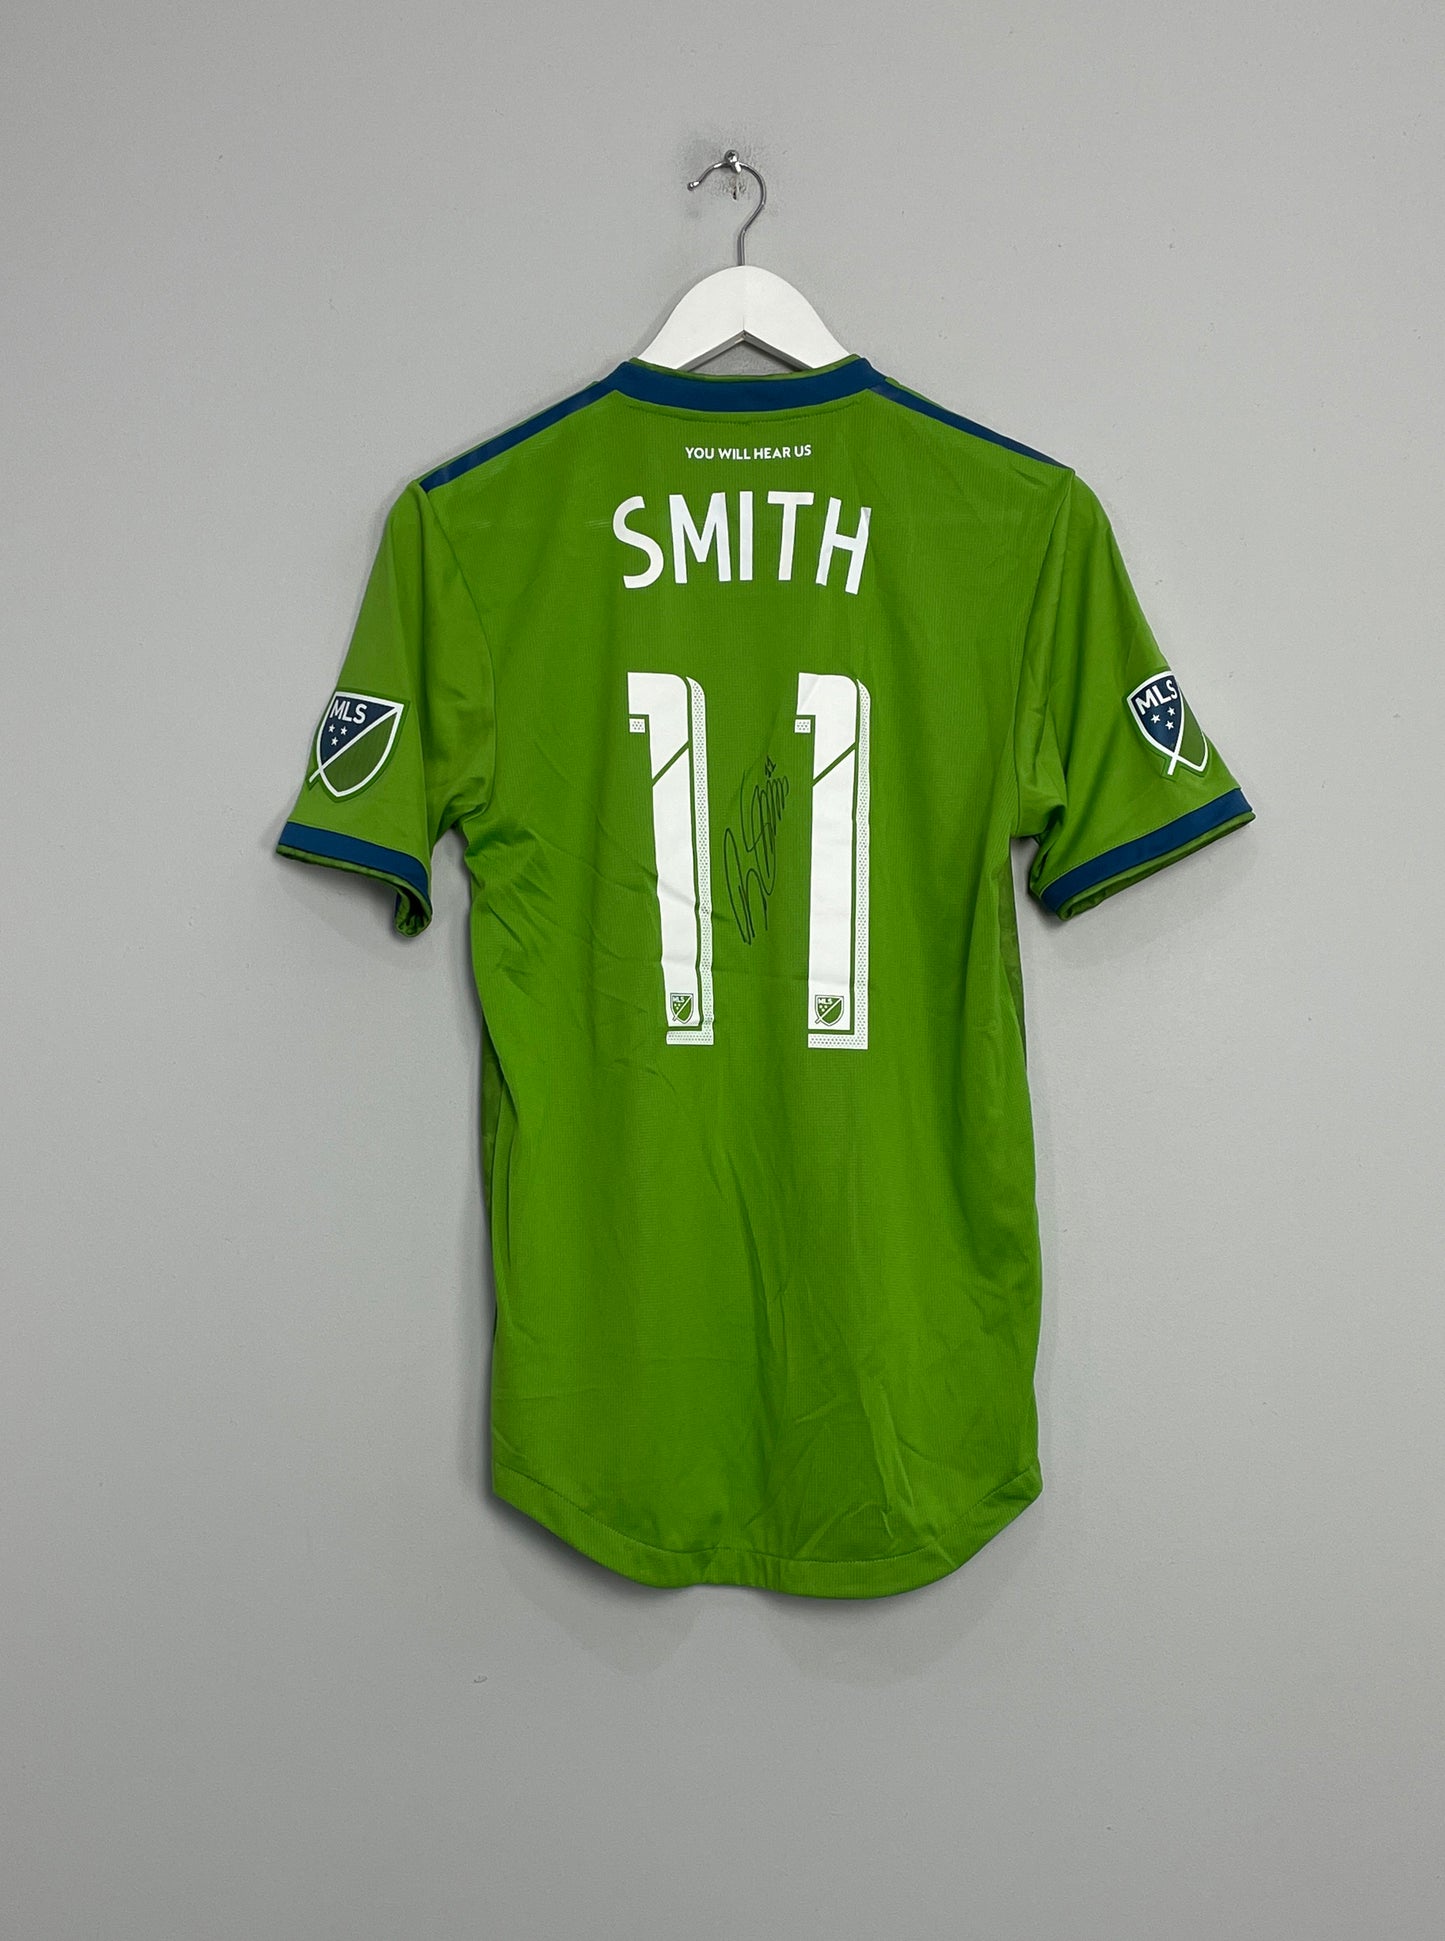 Image of the Seattle Sounders Smith shirt from the 2019/20 season